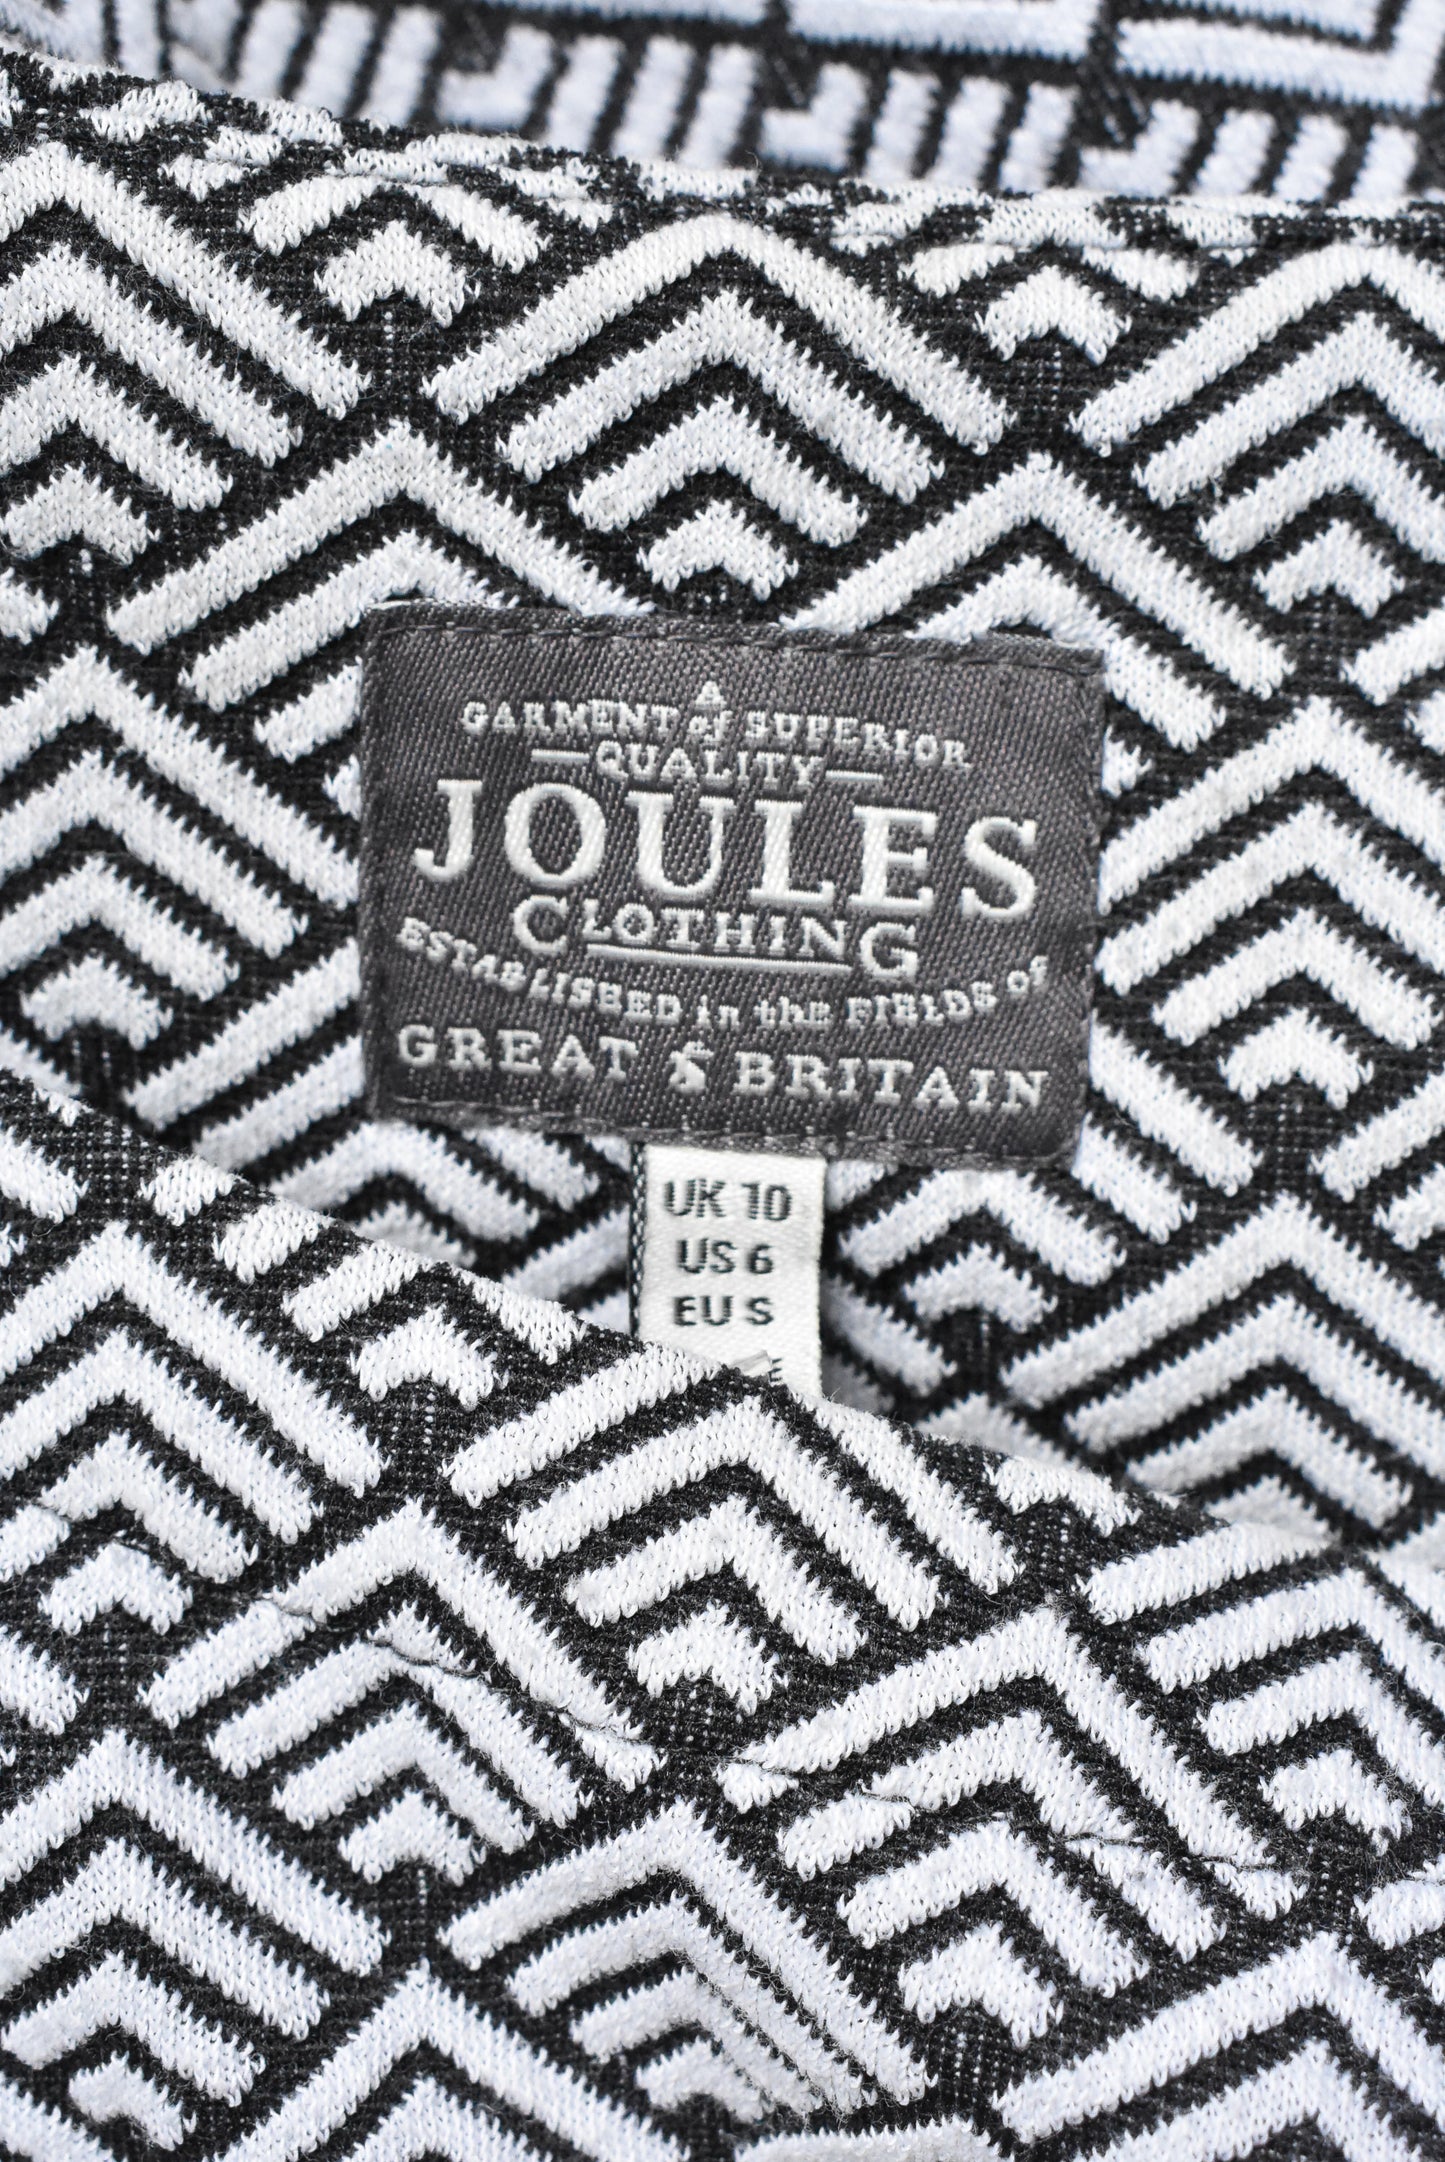 Joules chevron patterned dress with pockets, 10